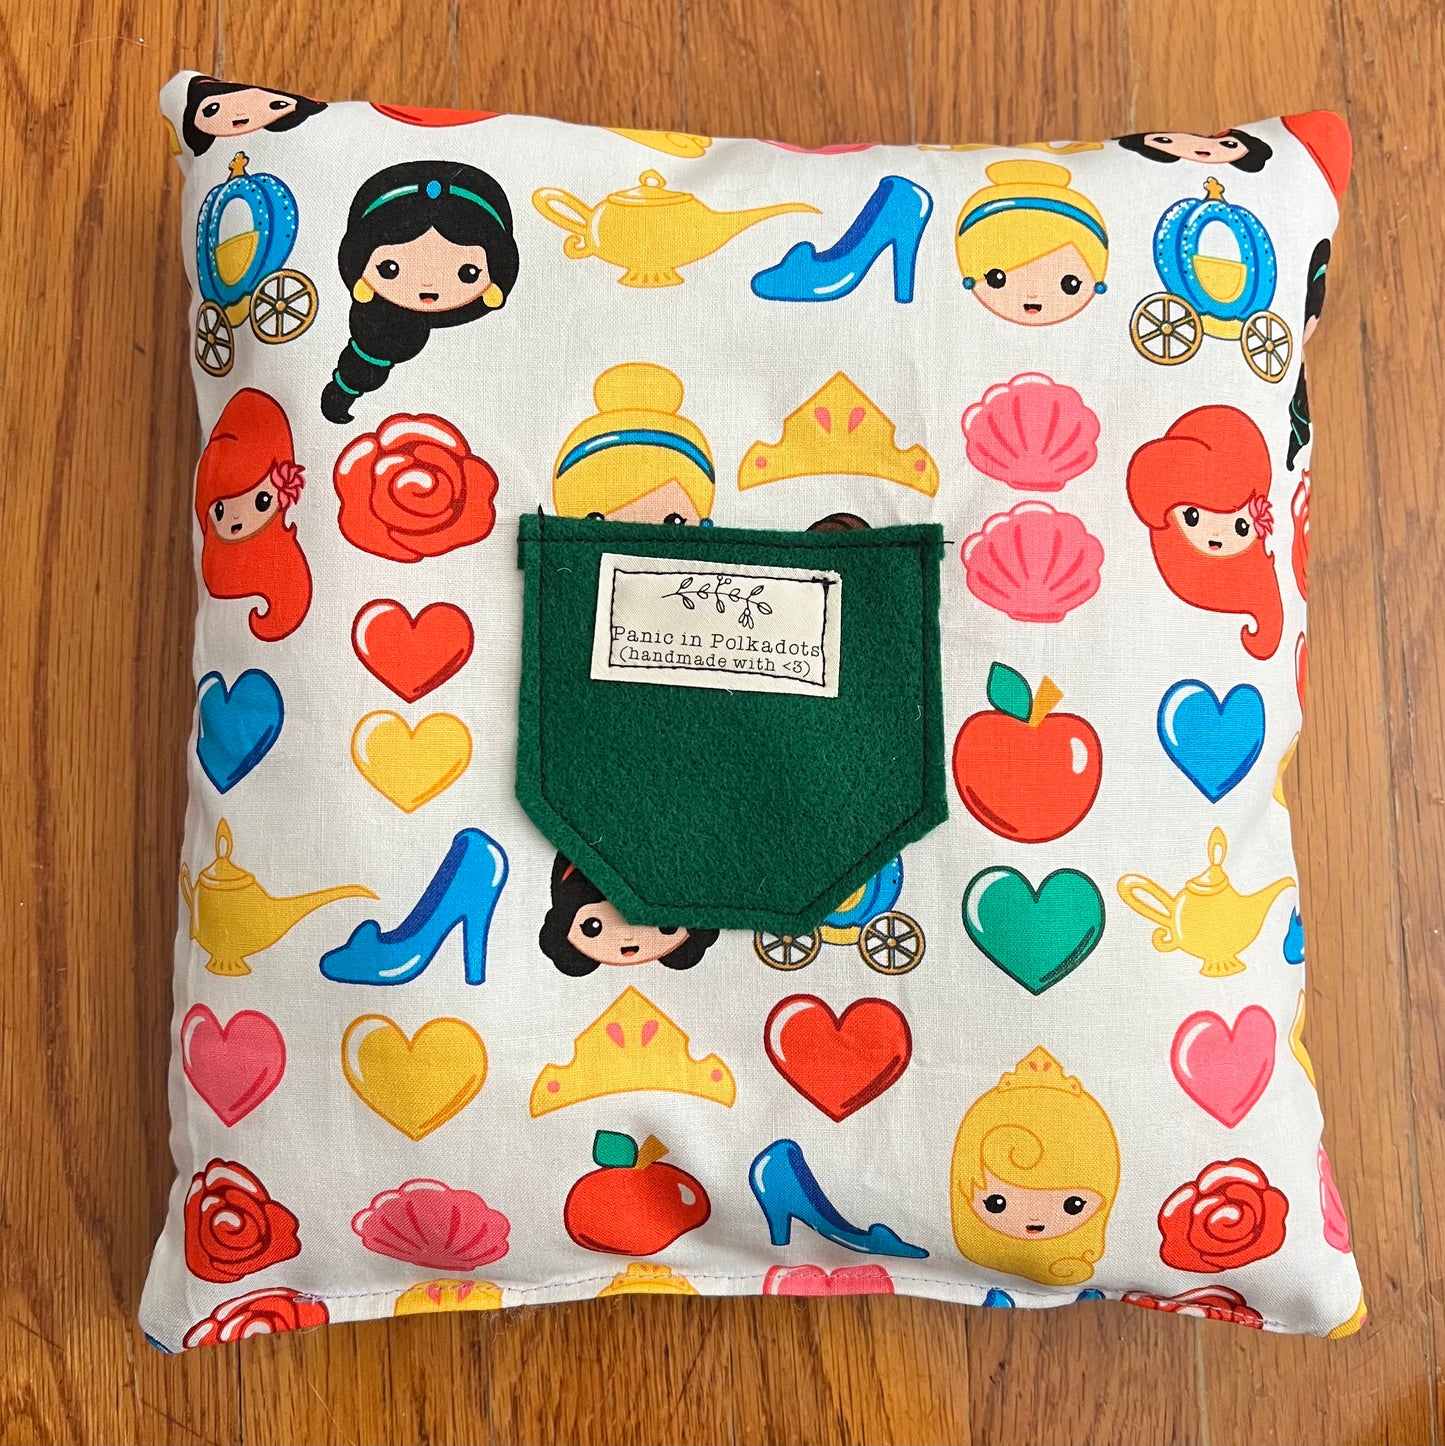 back view of pillow, with disney princess print, and a felt green pocket with Panic label